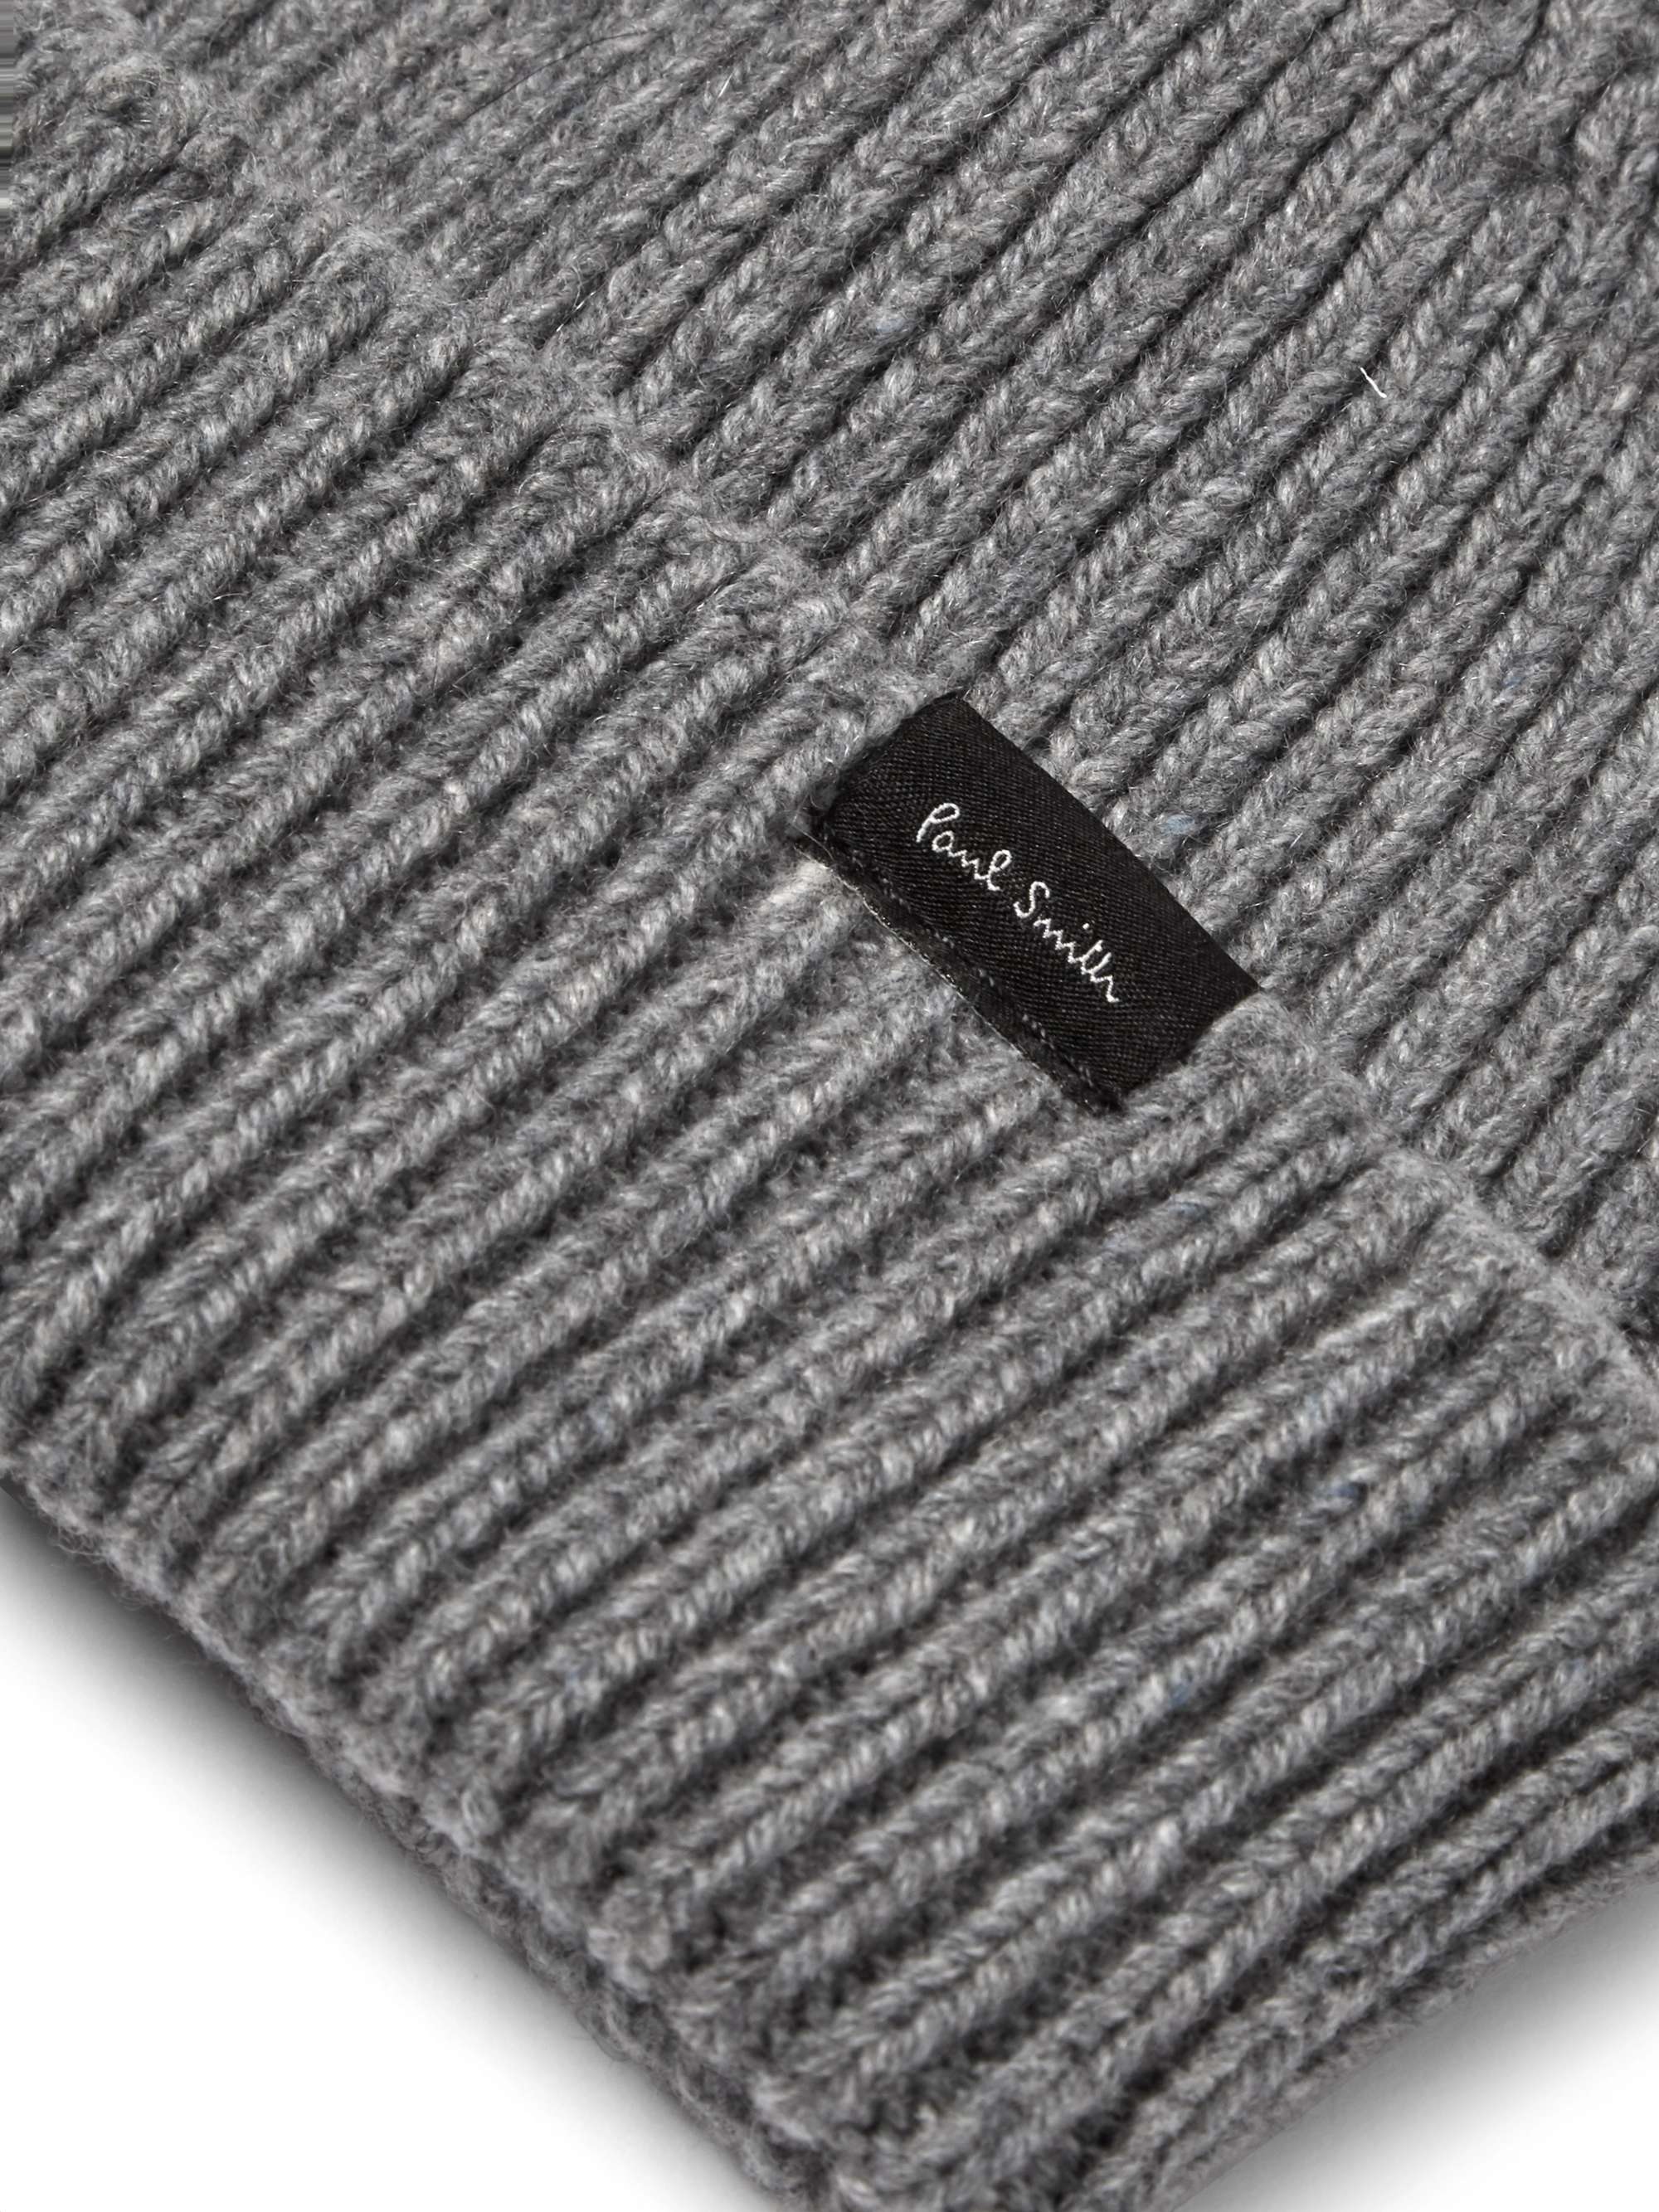 PAUL SMITH Ribbed Cashmere and Wool-Blend Beanie